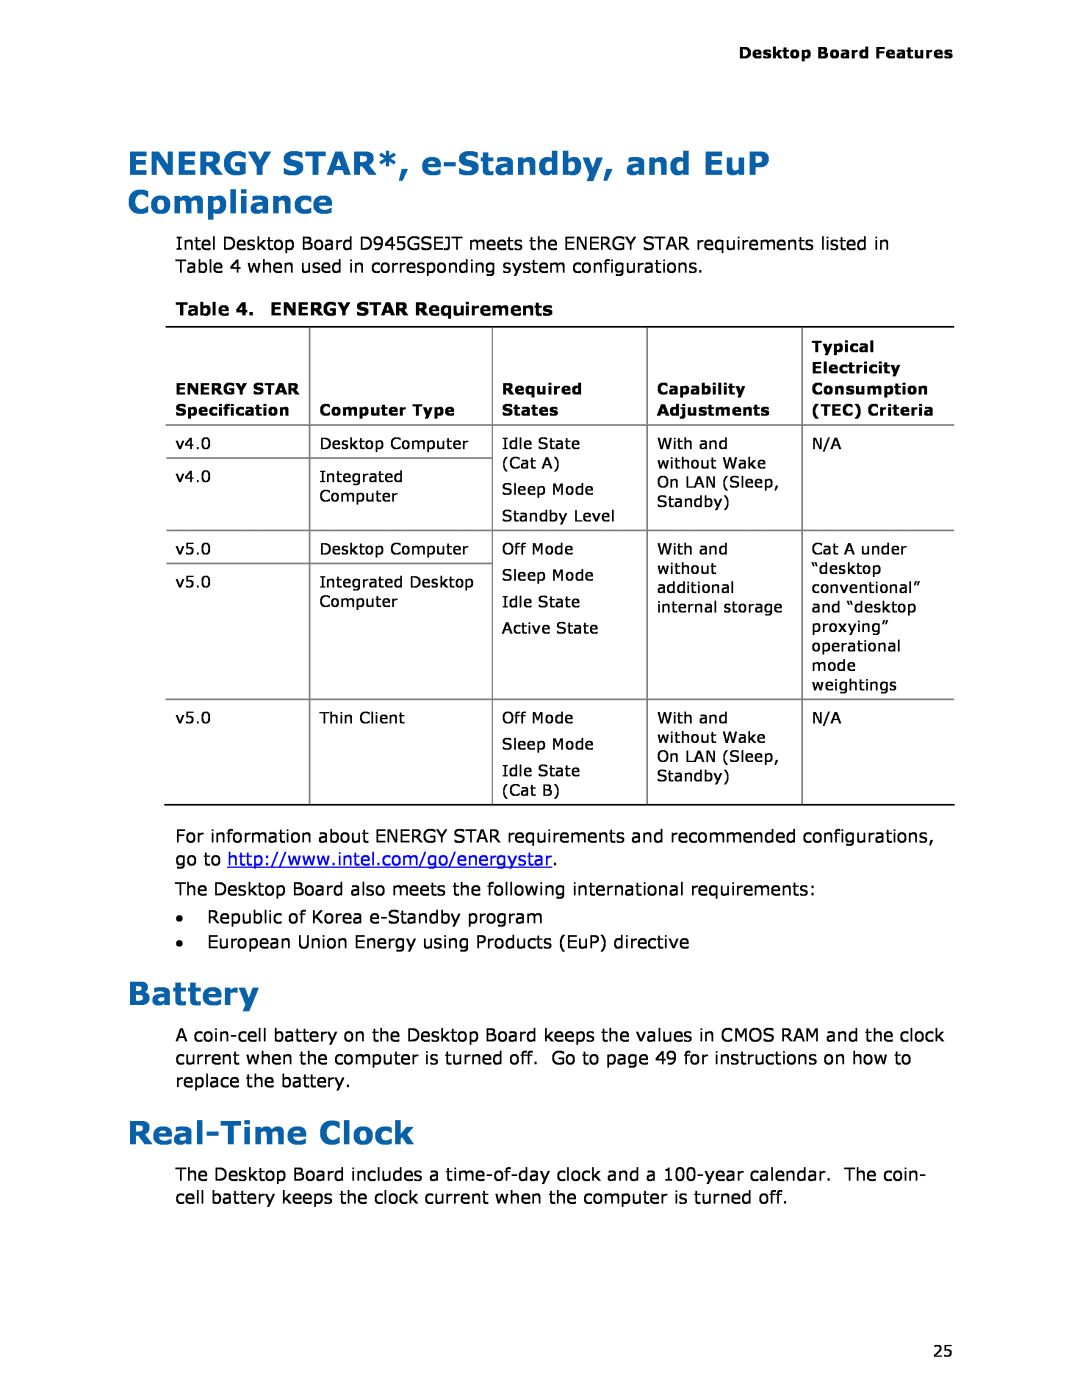 Intel D945GSEJT manual ENERGY STAR*, e-Standby,and EuP Compliance, Battery, Real-TimeClock, ENERGY STAR Requirements 